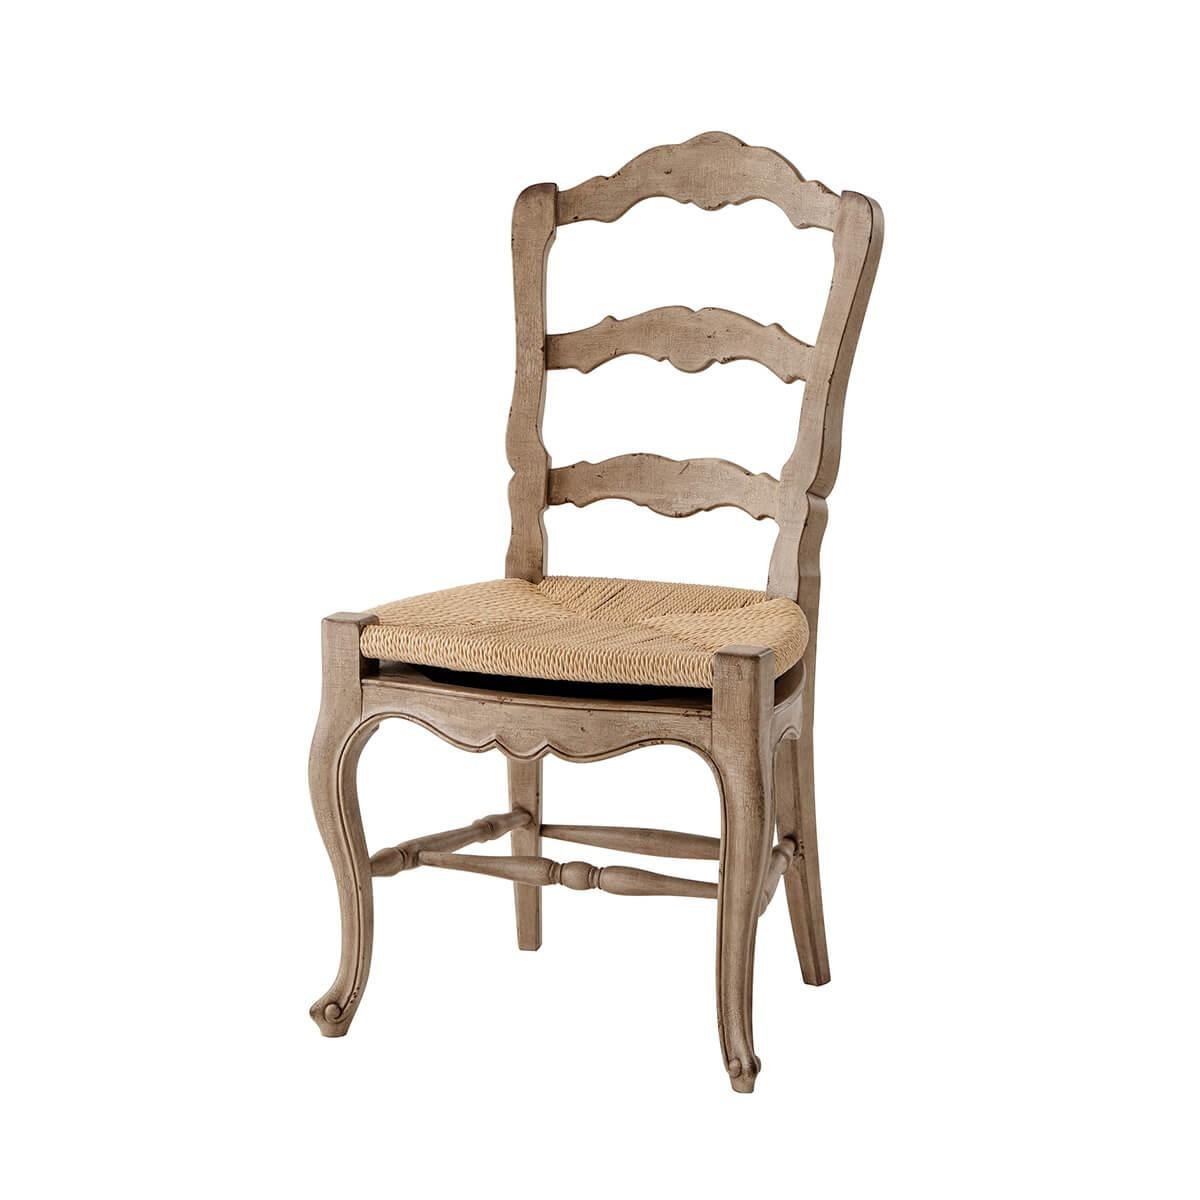 Two rustic painted dining chairs, the arched ladder back above a 'floating' faux rush seat, on cabriole legs joined by turned stretchers. Inspired by a 19th-century French original.
Dimensions: 20.75